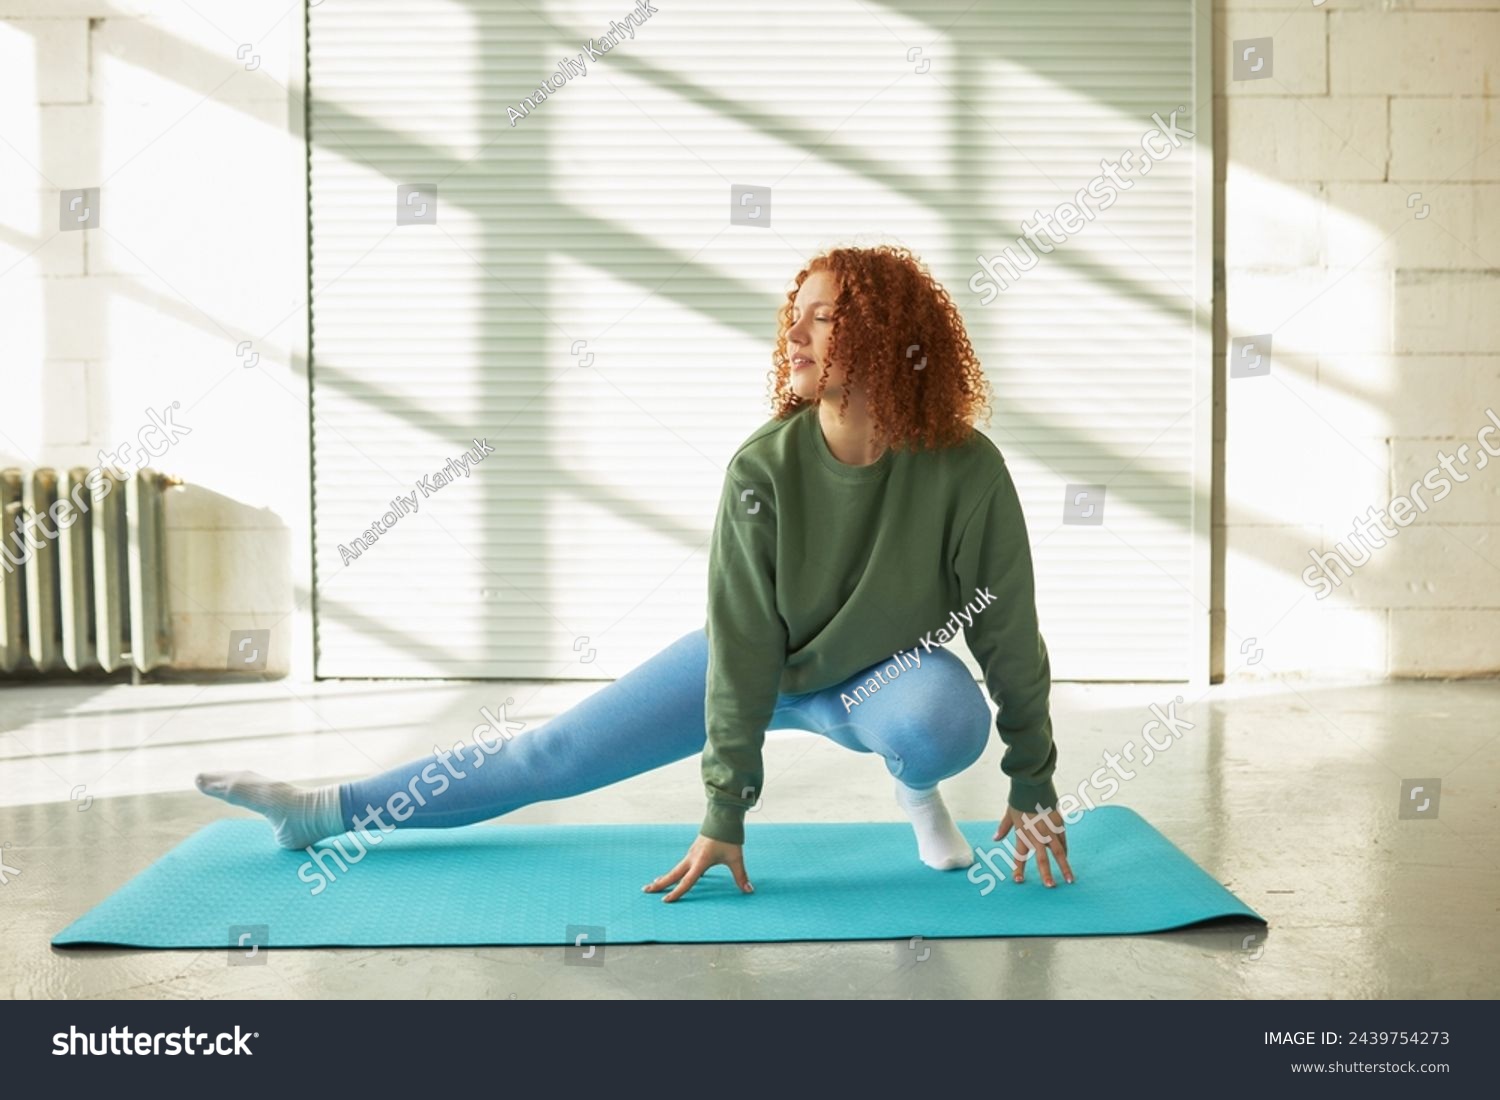 Full-length portrait of flexible redhead woman in sports clothes at gym stretching leg, bending one knee, training indoors, keeping fit and losing weight, enjoying physical exercises #2439754273